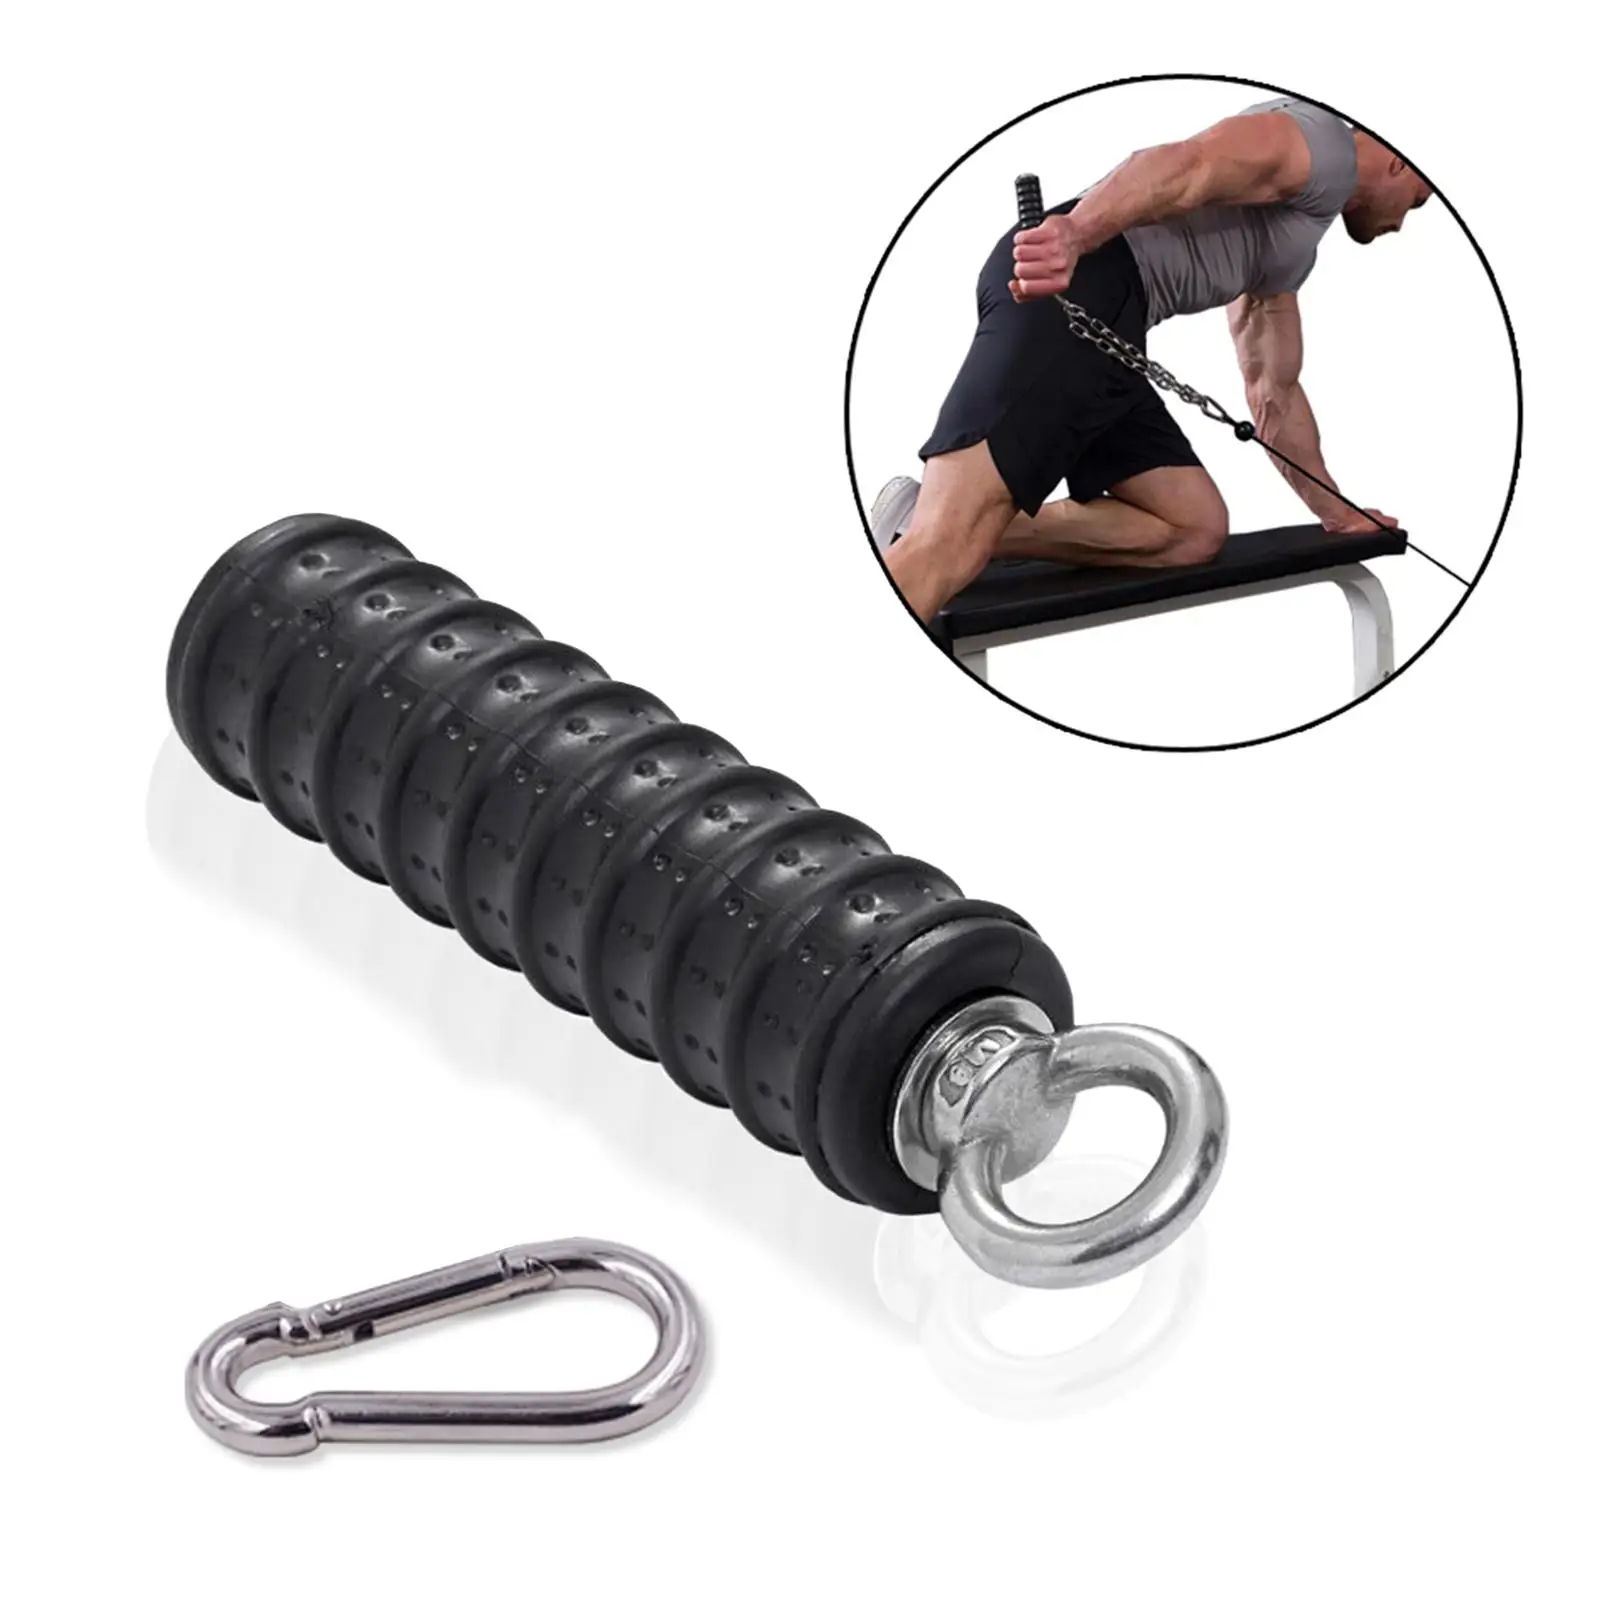 2x Pull Up Handle Grip Strength Core Workout Arm Training Tool